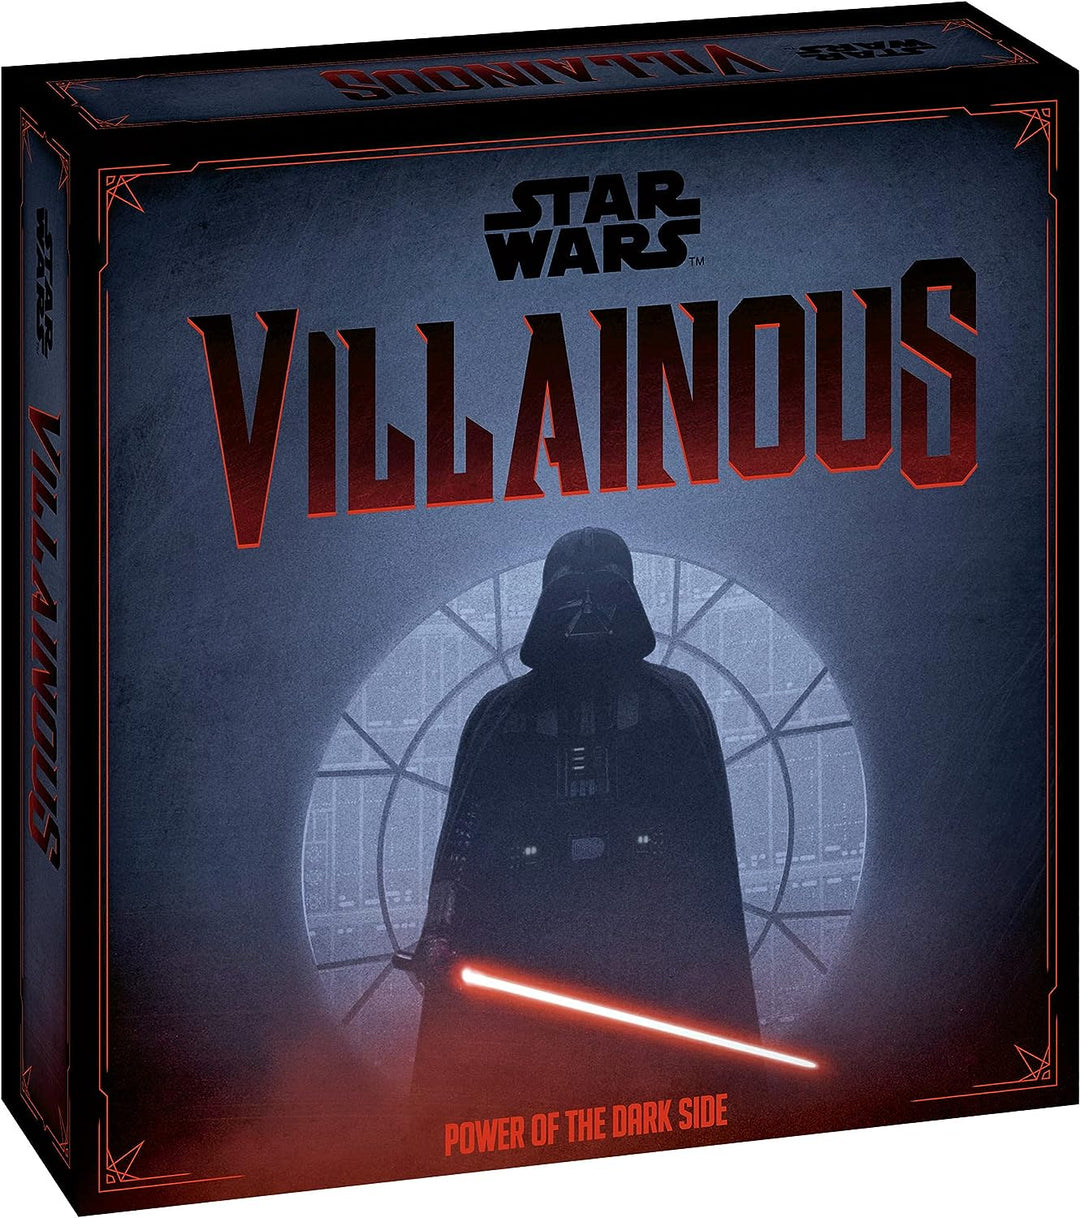 Ravensburger Star Wars Villainous Power of the Dark Side - Darth Vader - Expandable Strategy Family Board Games for Adults and Kids